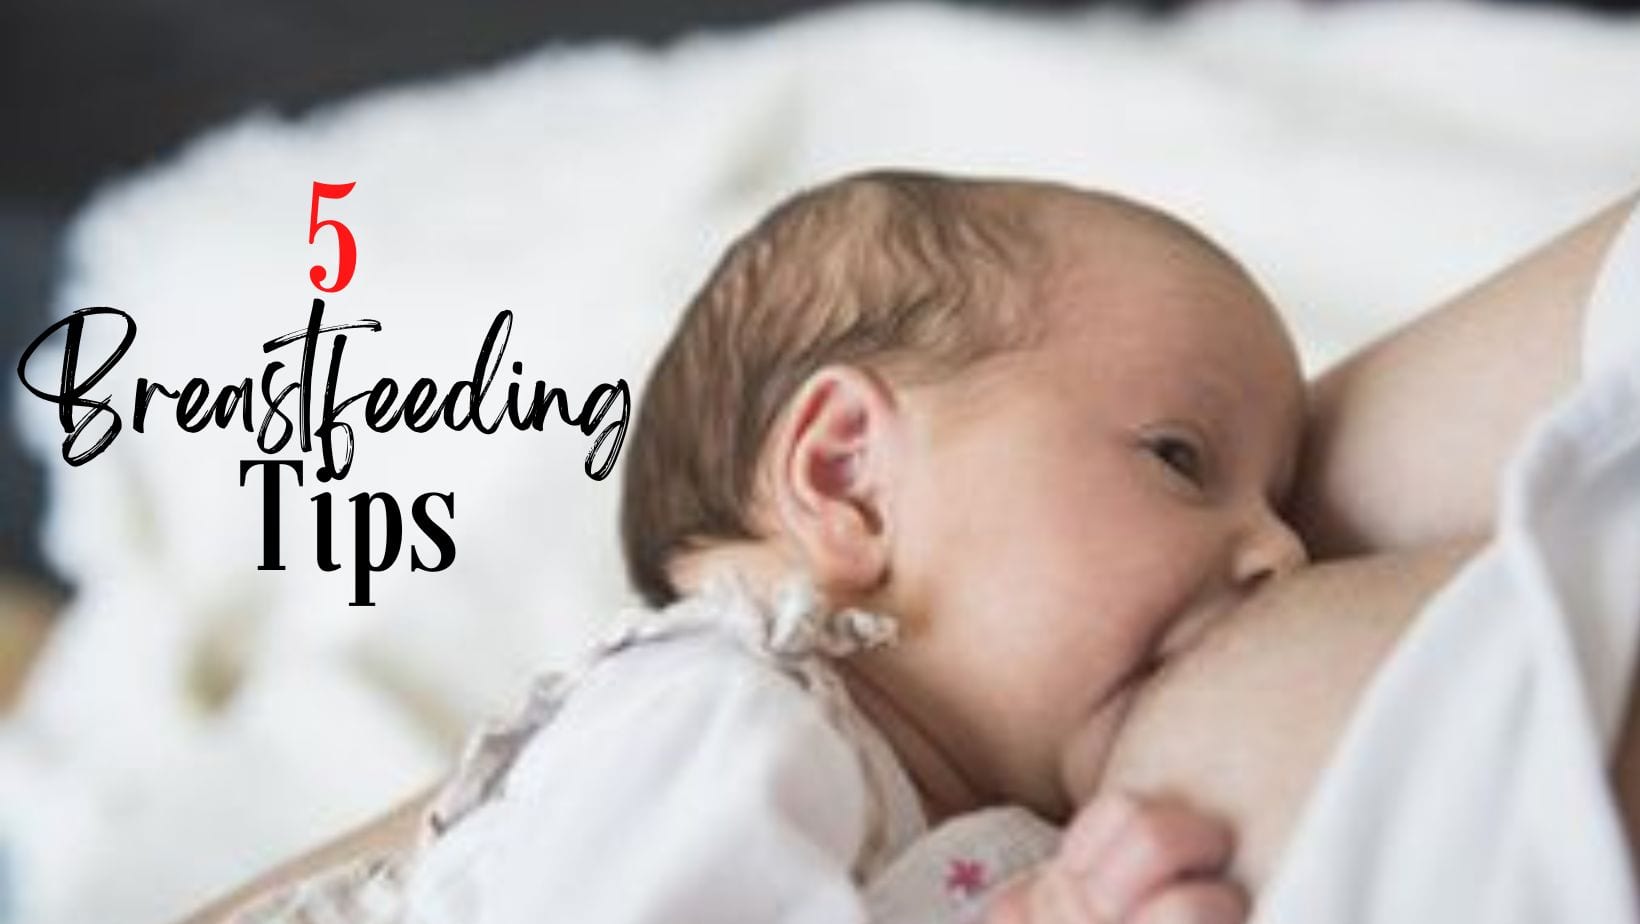 Breastfeeding Tips For New Age Moms: 5 Ways To Boost Your Baby’s Health